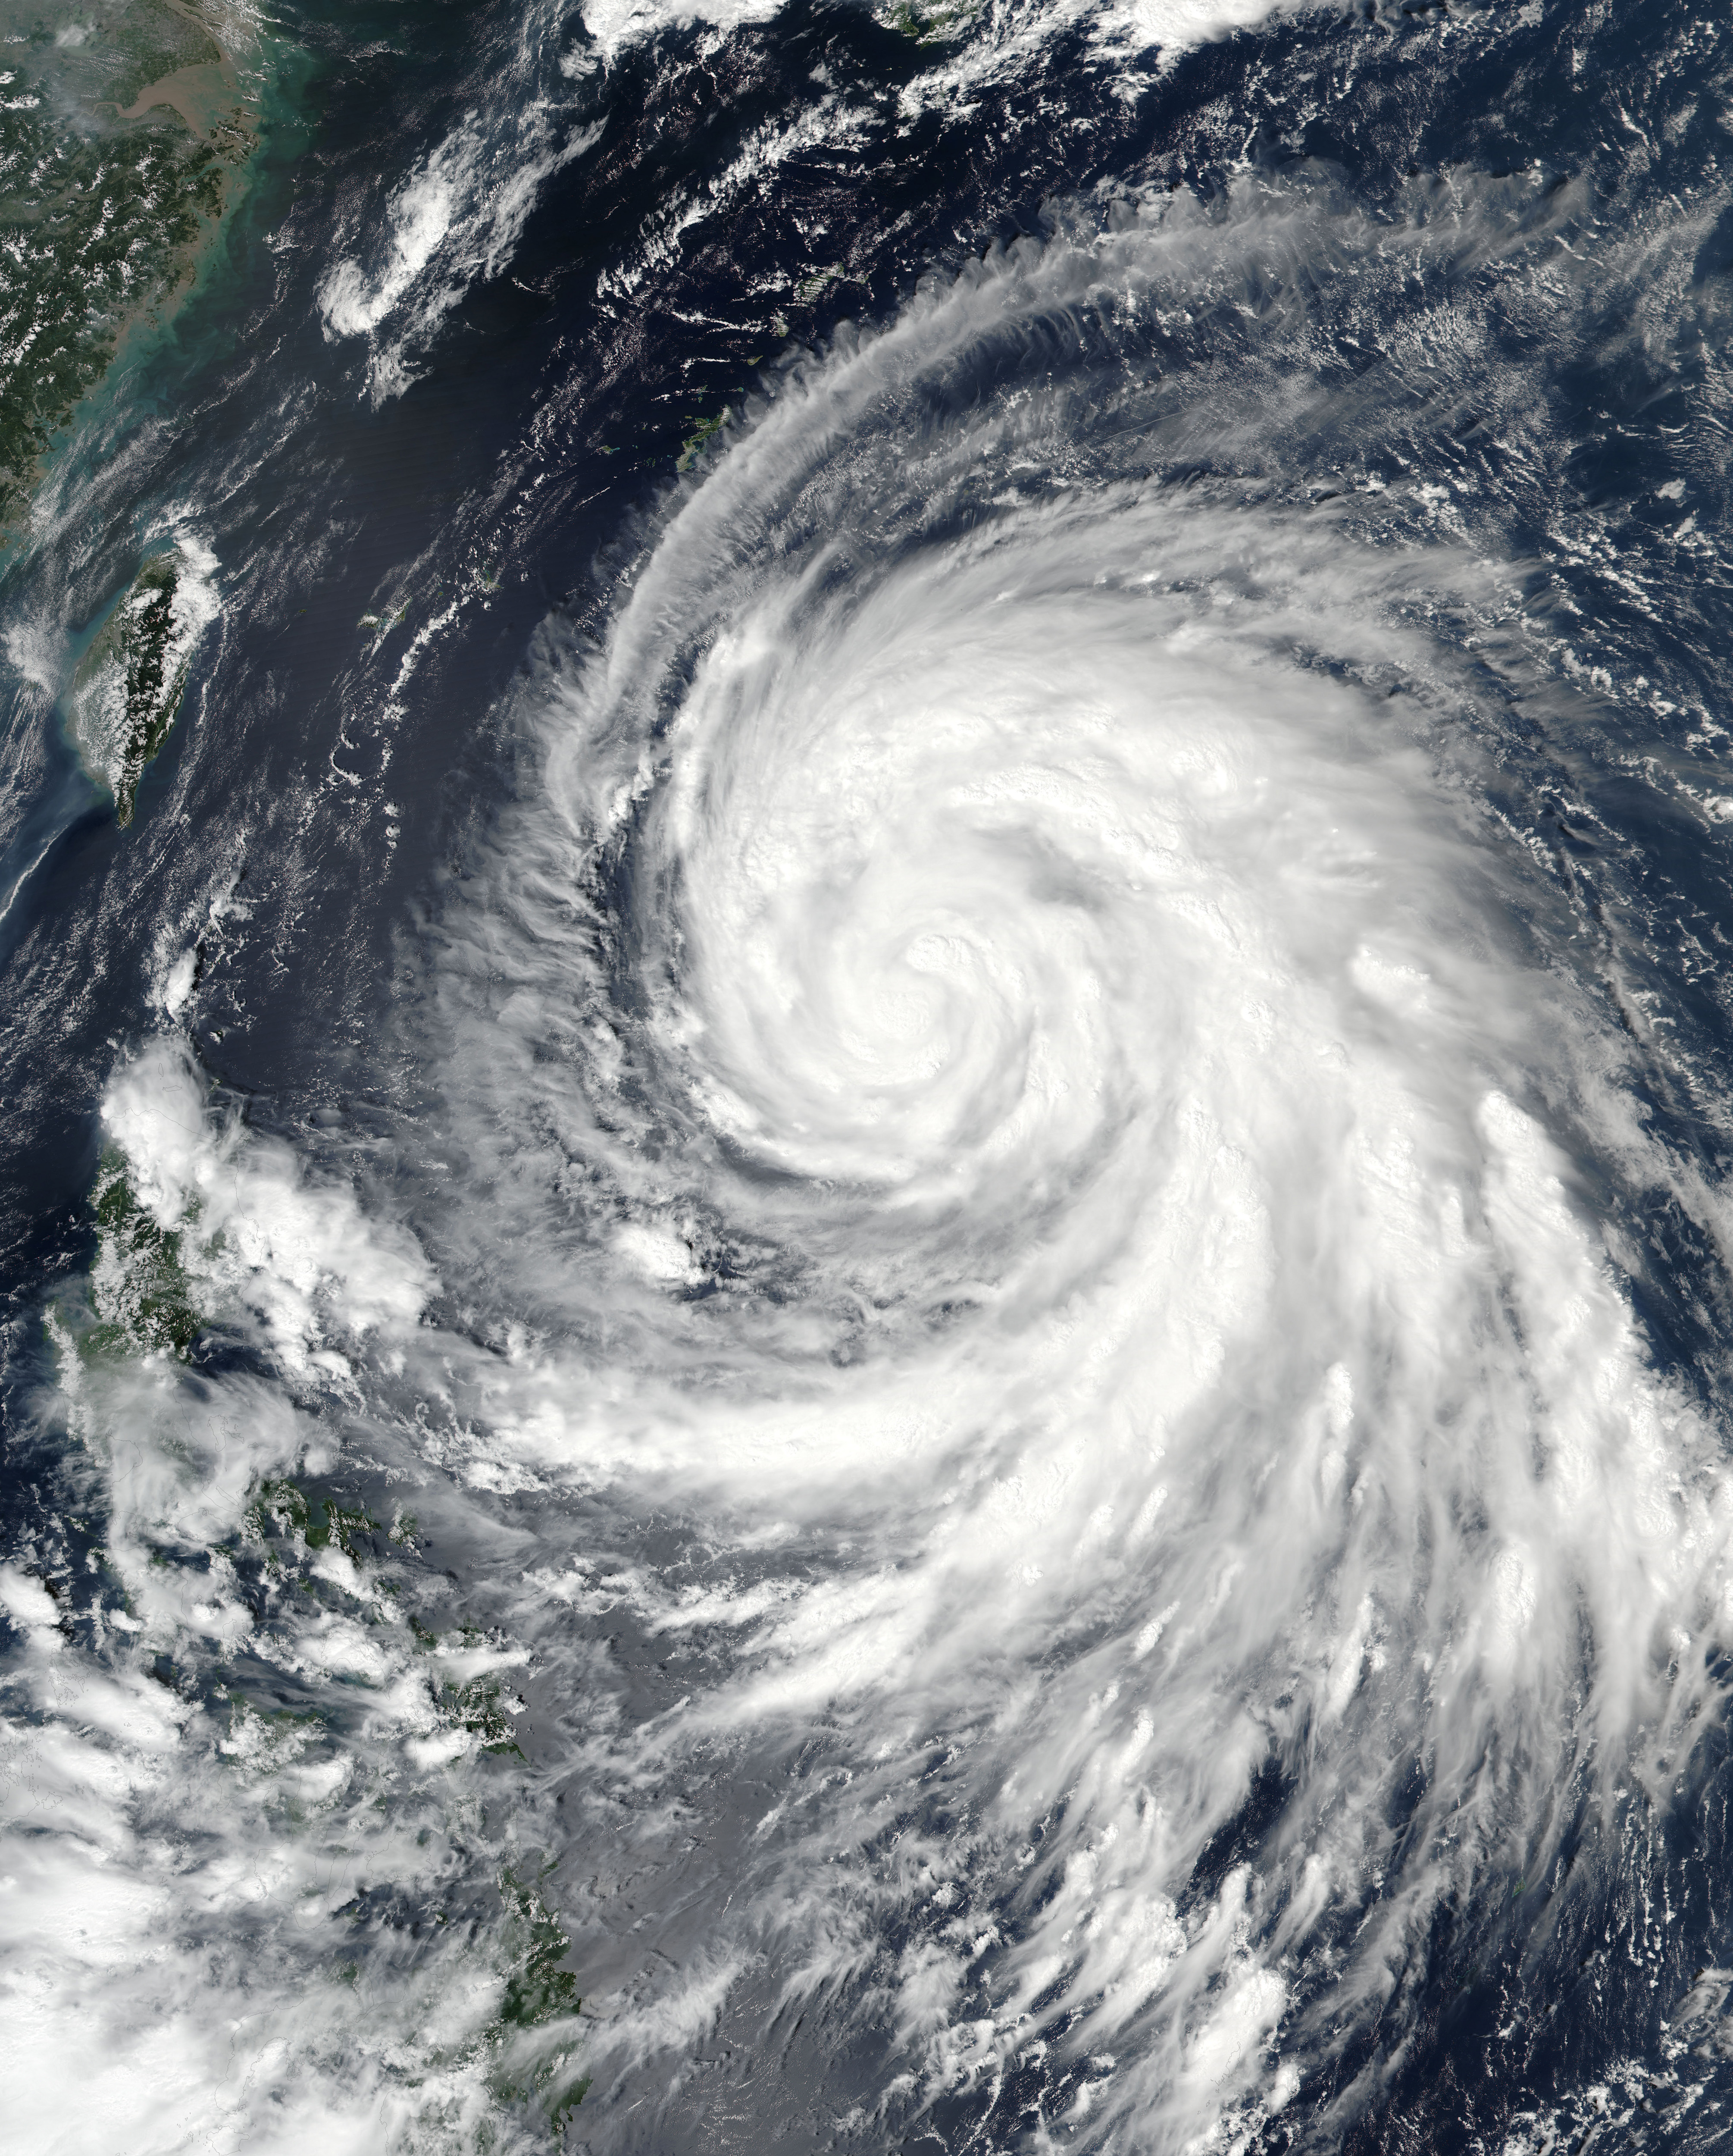 This September 25, 2016 NASA satellite image shows Typhoon Megi (20W) in the western Pacific. Typhoon Megi will continue to strengthen through Monday before threatening lives and property across Taiwan and eastern China this week. As of 2 p.m. local September 25, Typhoon Megi was centered 1,040 kilometers east-southeast of Eluanbi on Taiwan's southernmost tip and was moving in a west-northwest direction at a speed of 23 kph, with gusts reaching 137 kph, according to Taiwan's Central Weather Bureau.  / AFP PHOTO / NASA / HO / RESTRICTED TO EDITORIAL USE - MANDATORY CREDIT "AFP PHOTO / NASA" - NO MARKETING - NO ADVERTISING CAMPAIGNS - DISTRIBUTED AS A SERVICE TO CLIENTS